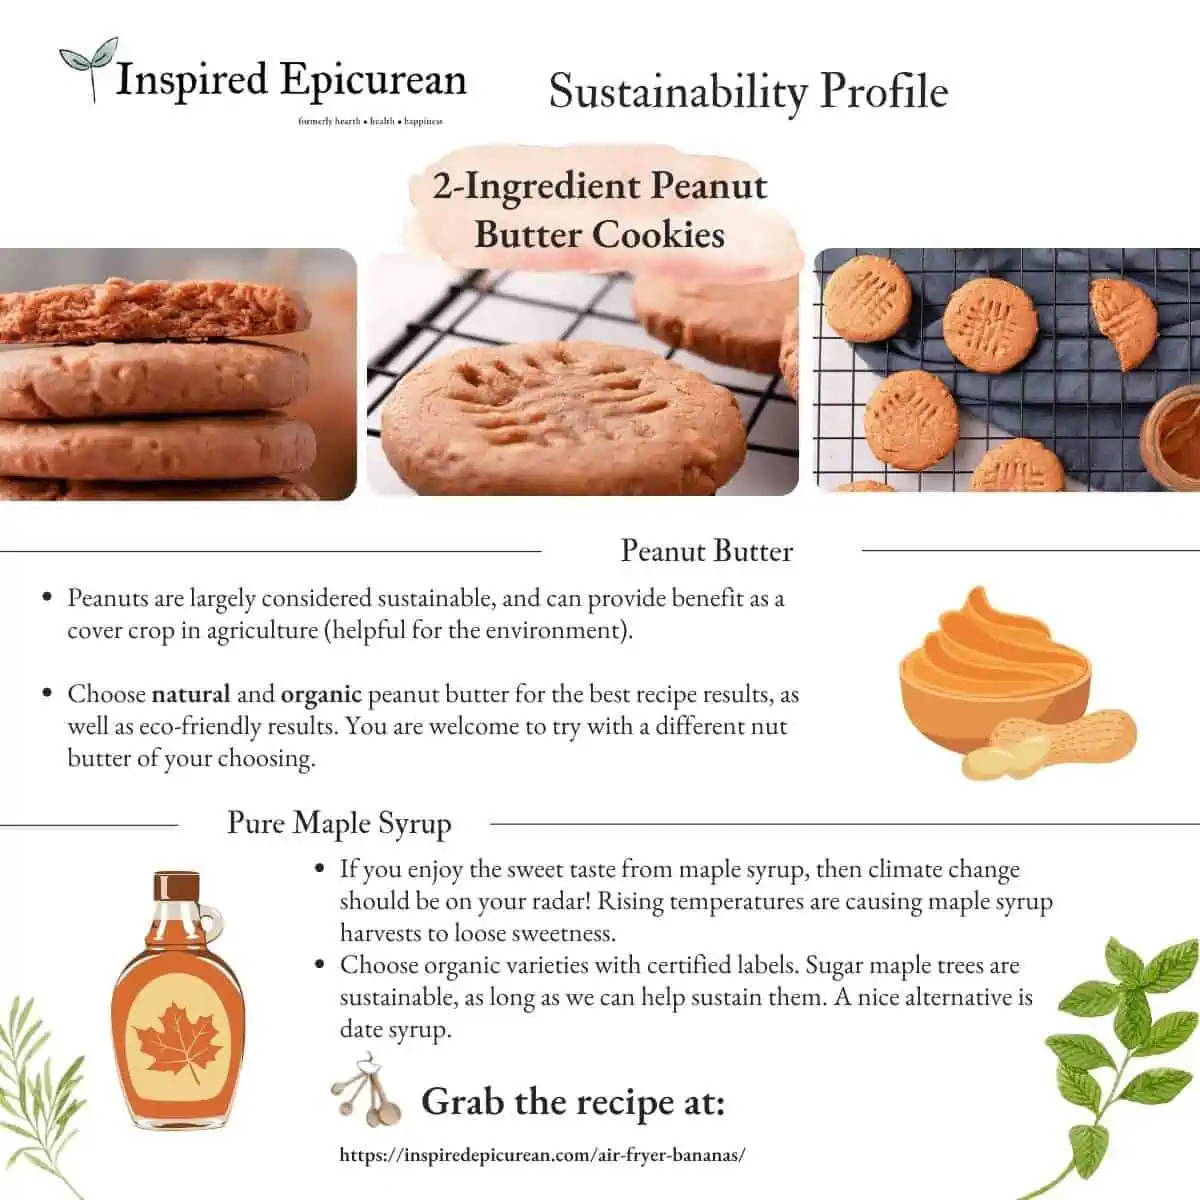 graphics and text outlining the sustainability of these peanut butter cookies